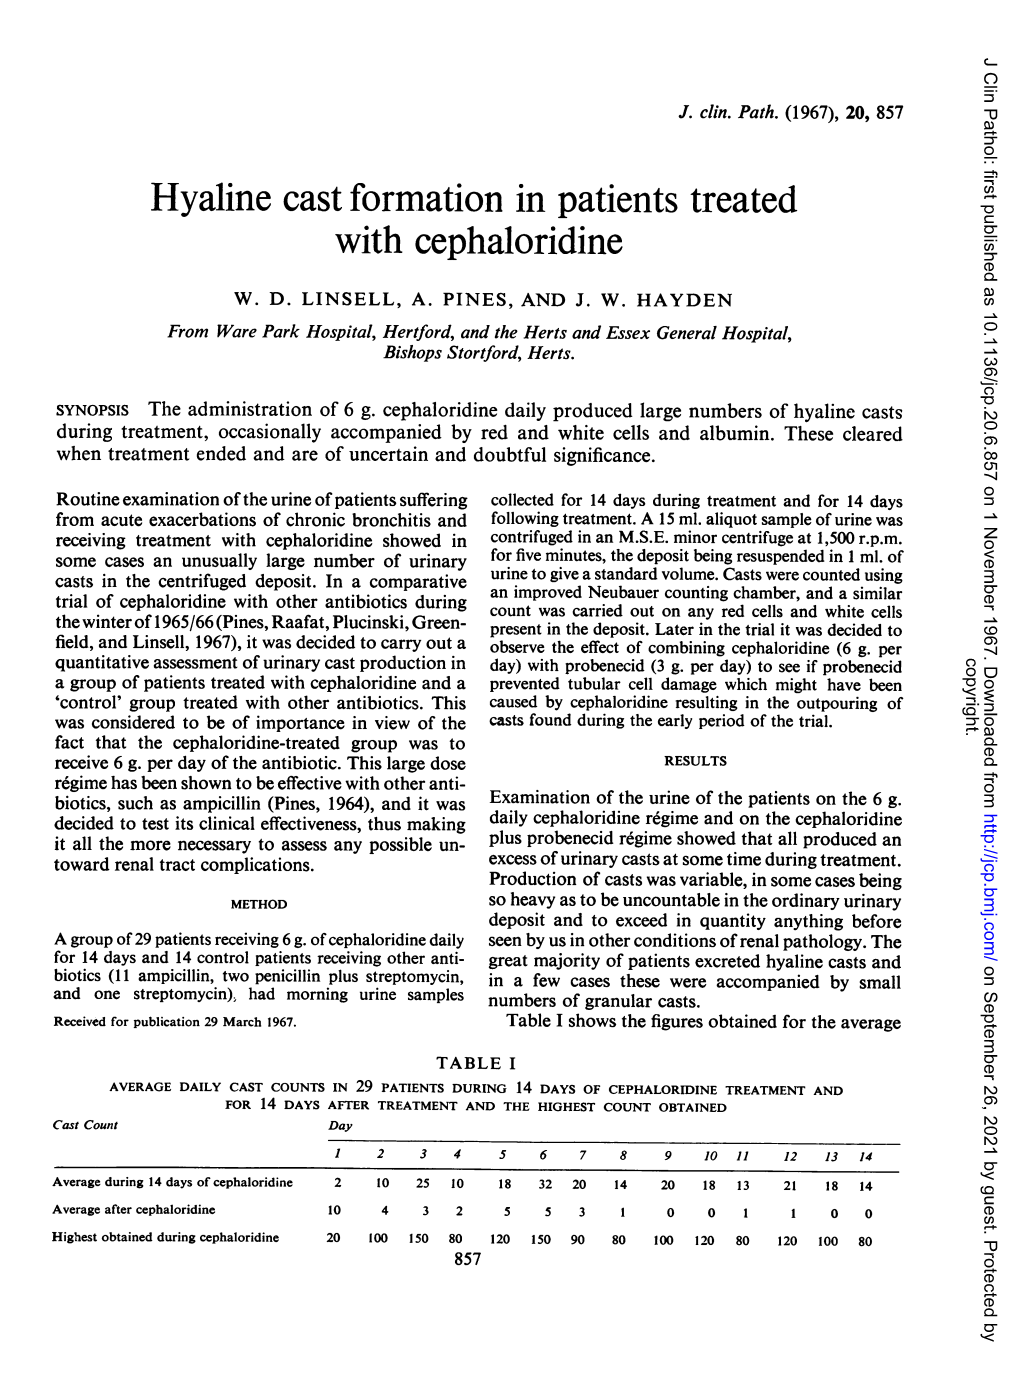 Hyaline Cast Formation in Patients Treated with Cephaloridine